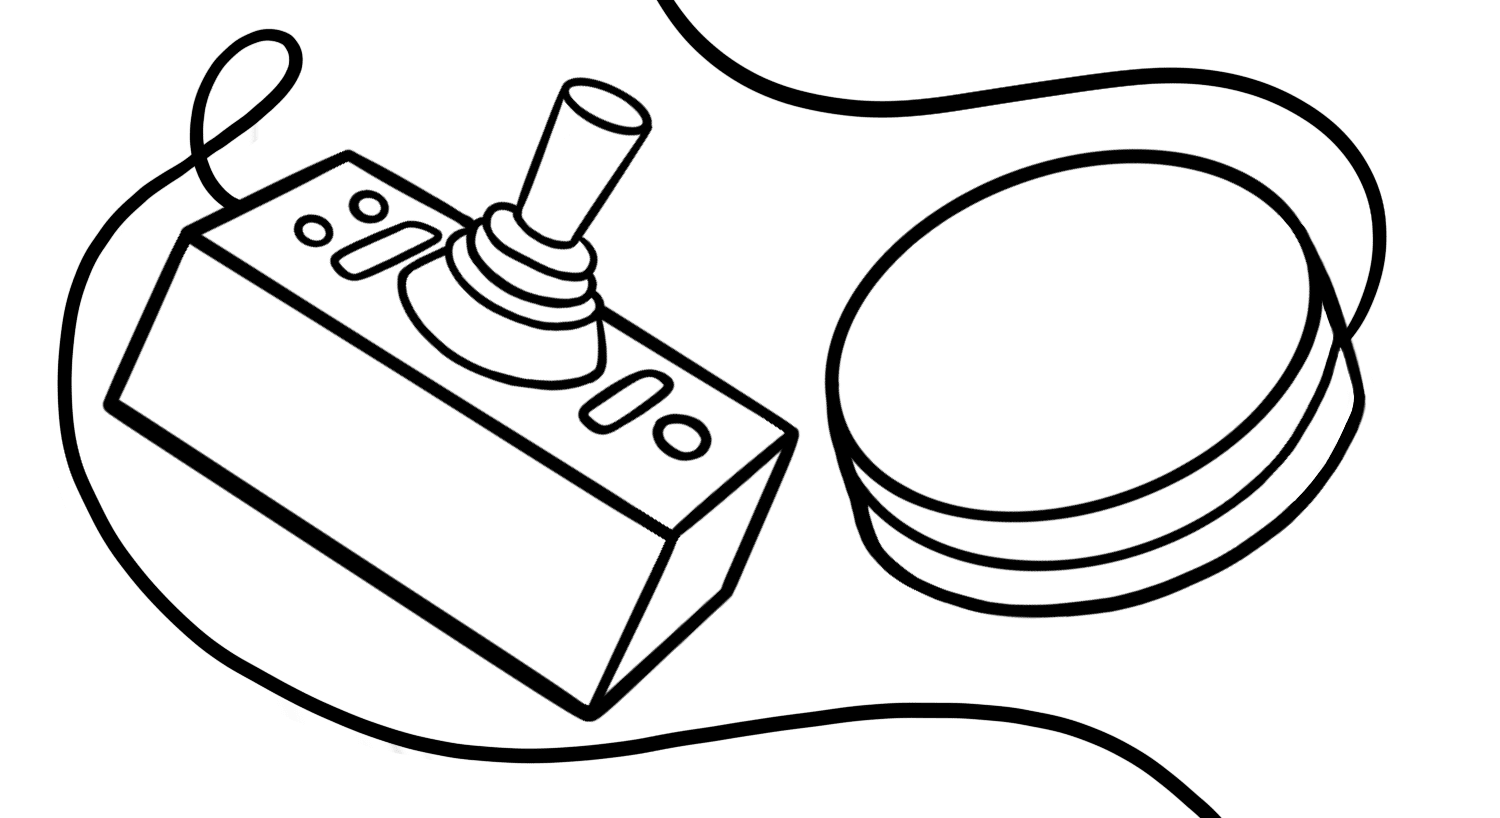 Illustration: Close-up view of a Tecla joystick and switch, representing a couple different versions of assistive controls used by those with physical challenges that make movement and speaking difficult.